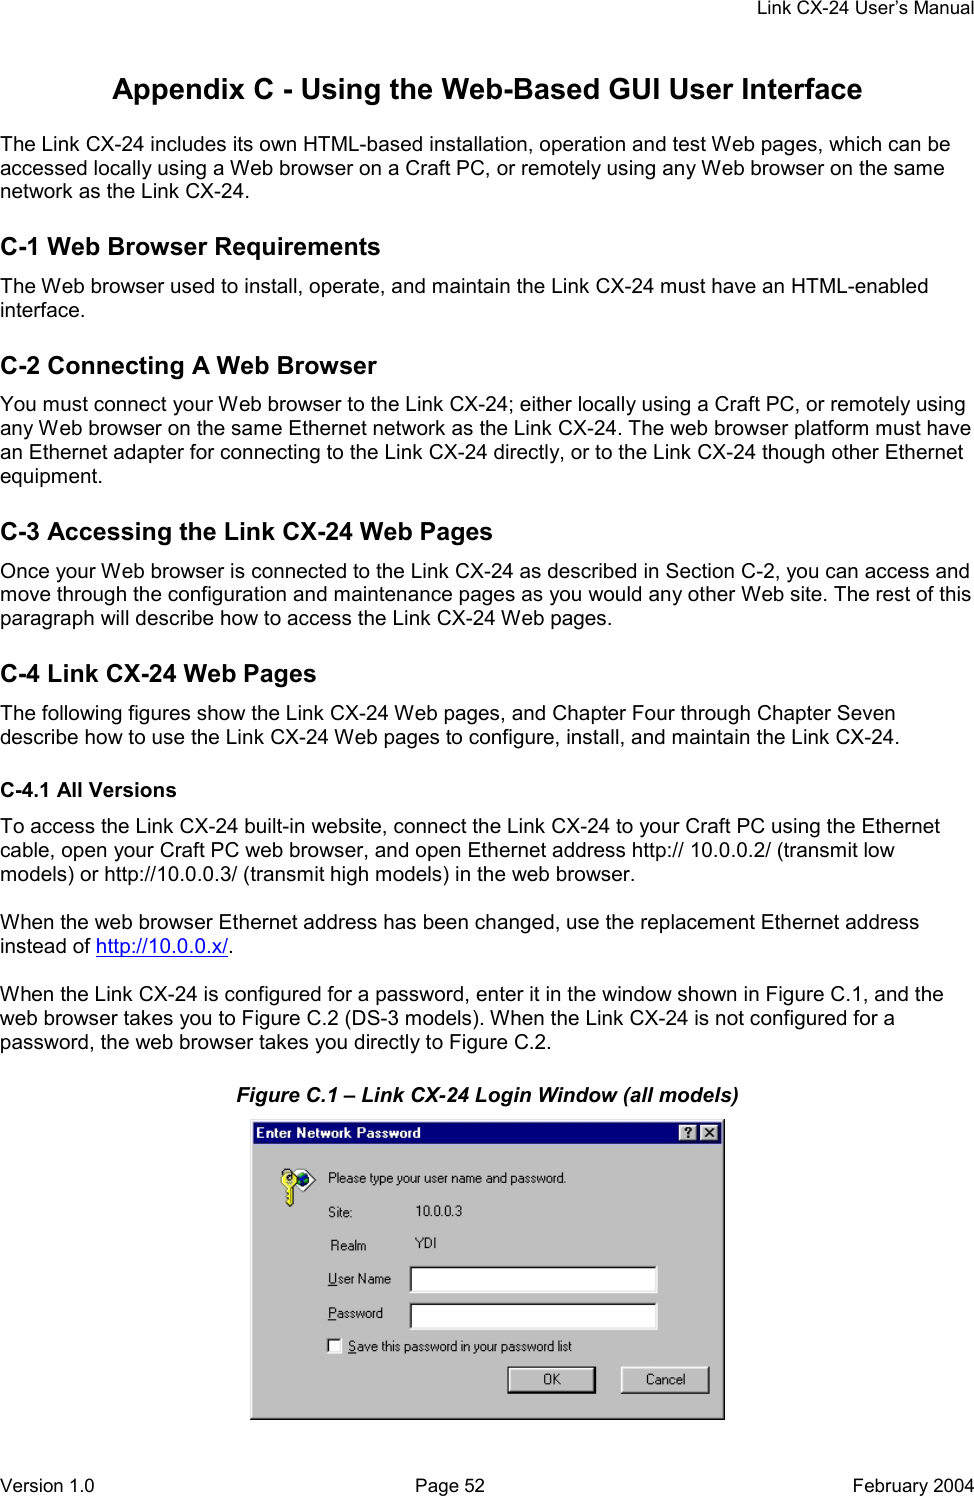     Link CX-24 User’s Manual Version 1.0  Page 52  February 2004 Appendix C - Using the Web-Based GUI User Interface 30000 The Link CX-24 includes its own HTML-based installation, operation and test Web pages, which can be accessed locally using a Web browser on a Craft PC, or remotely using any Web browser on the same network as the Link CX-24. C-1 Web Browser Requirements The Web browser used to install, operate, and maintain the Link CX-24 must have an HTML-enabled interface. C-2 Connecting A Web Browser You must connect your Web browser to the Link CX-24; either locally using a Craft PC, or remotely using any Web browser on the same Ethernet network as the Link CX-24. The web browser platform must have an Ethernet adapter for connecting to the Link CX-24 directly, or to the Link CX-24 though other Ethernet equipment. C-3 Accessing the Link CX-24 Web Pages Once your Web browser is connected to the Link CX-24 as described in Section C-2, you can access and move through the configuration and maintenance pages as you would any other Web site. The rest of this paragraph will describe how to access the Link CX-24 Web pages. C-4 Link CX-24 Web Pages The following figures show the Link CX-24 Web pages, and Chapter Four through Chapter Seven describe how to use the Link CX-24 Web pages to configure, install, and maintain the Link CX-24. C-4.1 All Versions To access the Link CX-24 built-in website, connect the Link CX-24 to your Craft PC using the Ethernet cable, open your Craft PC web browser, and open Ethernet address http:// 10.0.0.2/ (transmit low models) or http://10.0.0.3/ (transmit high models) in the web browser.  When the web browser Ethernet address has been changed, use the replacement Ethernet address instead of http://10.0.0.x/.  When the Link CX-24 is configured for a password, enter it in the window shown in Figure C.1, and the web browser takes you to Figure C.2 (DS-3 models). When the Link CX-24 is not configured for a password, the web browser takes you directly to Figure C.2. Figure C.1 – Link CX-24 Login Window (all models)  